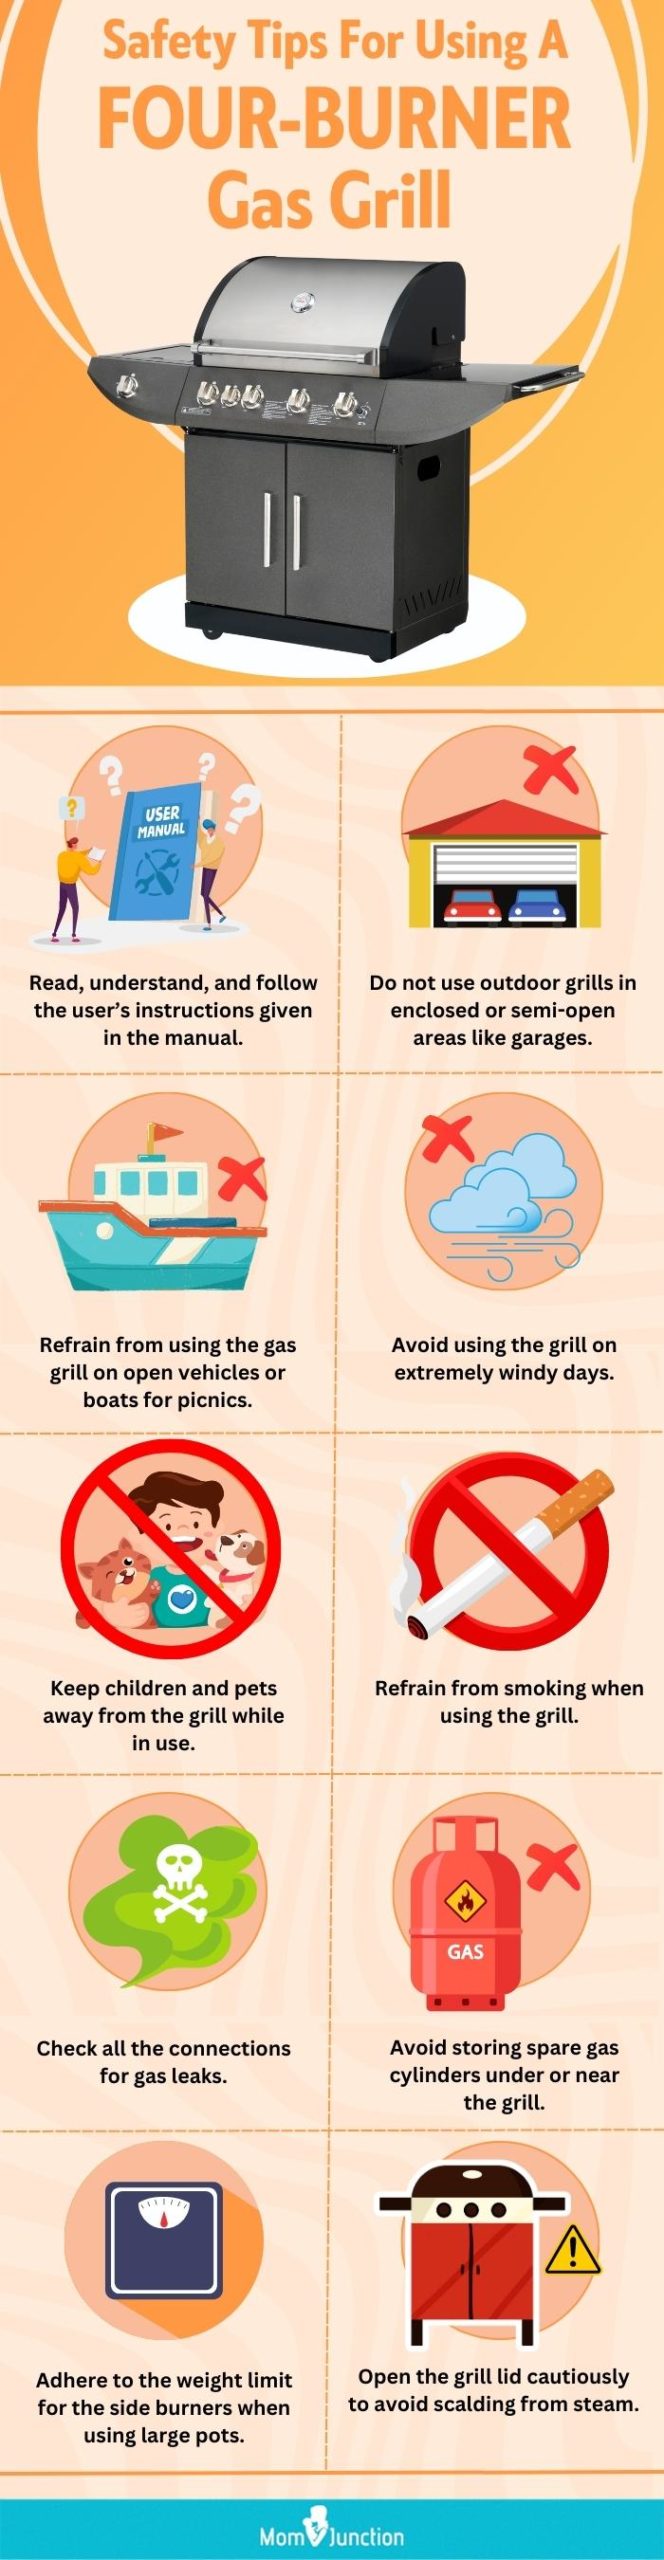 Safety Tips For Using A Four-Burner Gas Grill (infographic)